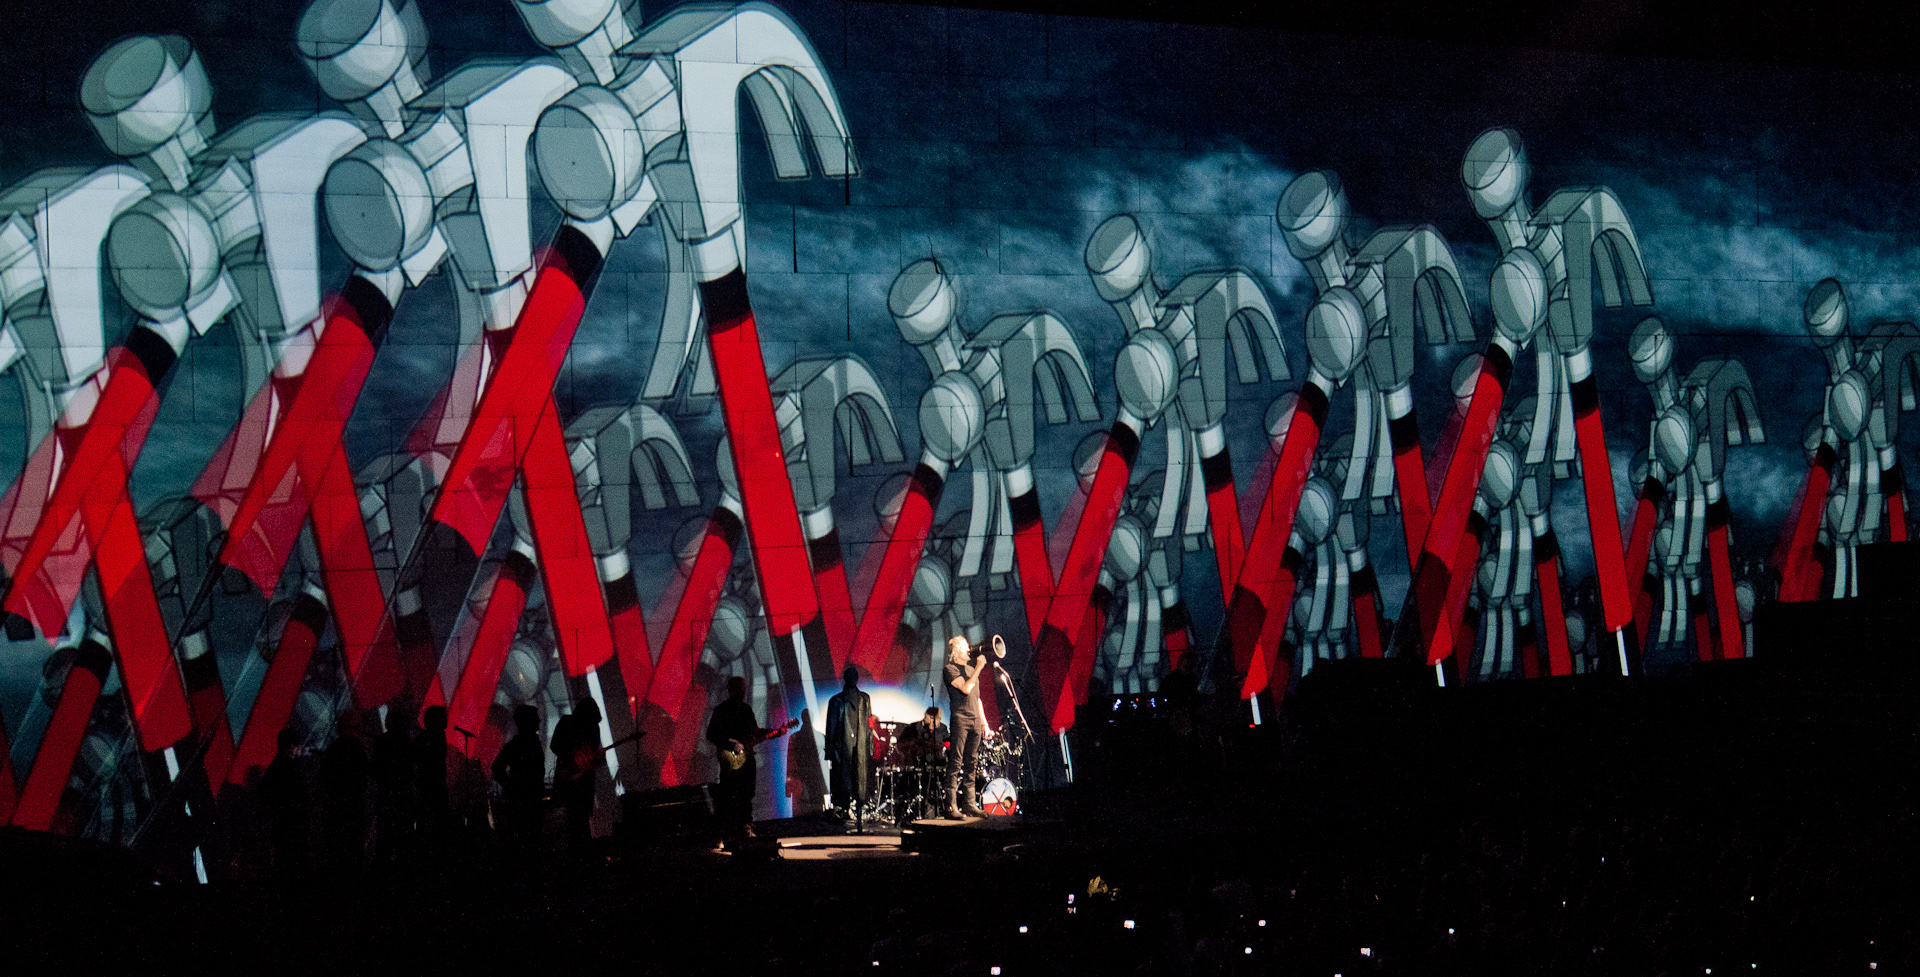 Roger Waters The Wall tour, September 16, 2010 at Air Canada Centre in Toronto. Photo: Sam Javanrouh/Flickr